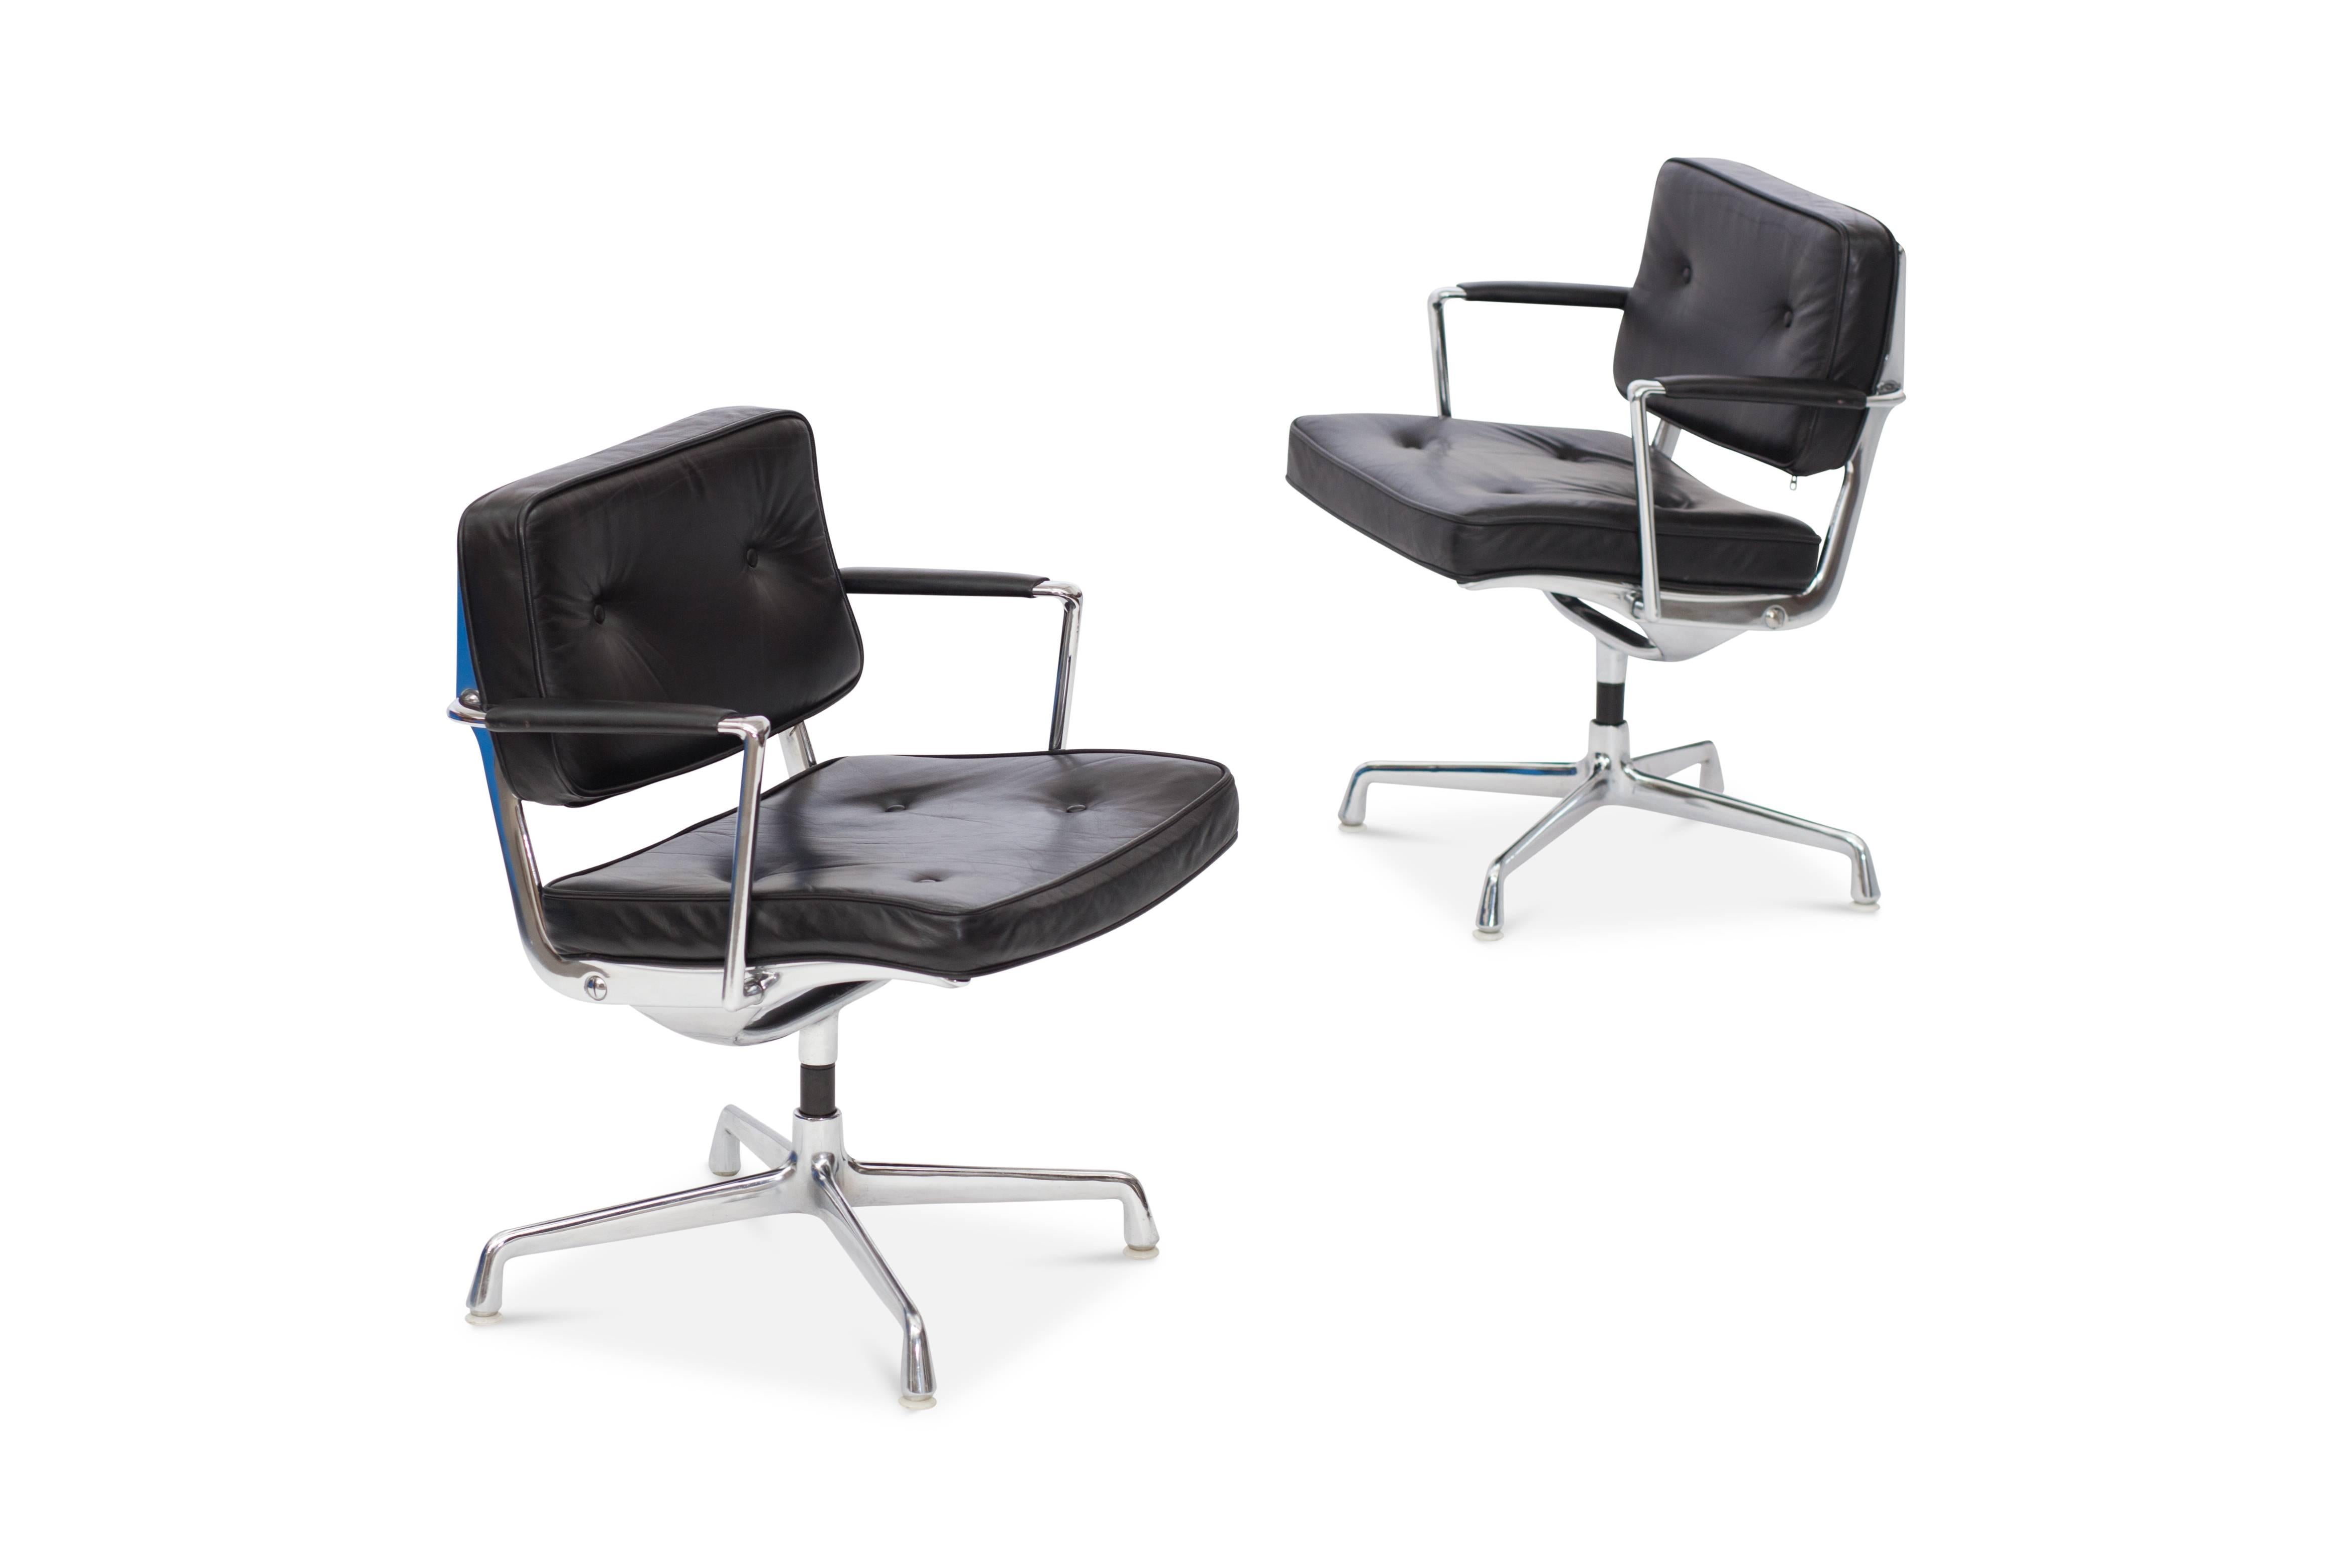 Charles and Ray Eames Intermediate chair in black leather upholstery and cast aluminum frame
introduced in 1968.

Charles and Ray called this design “intermediate” because it was intermediate in price and weight compared to other Eames chairs. It